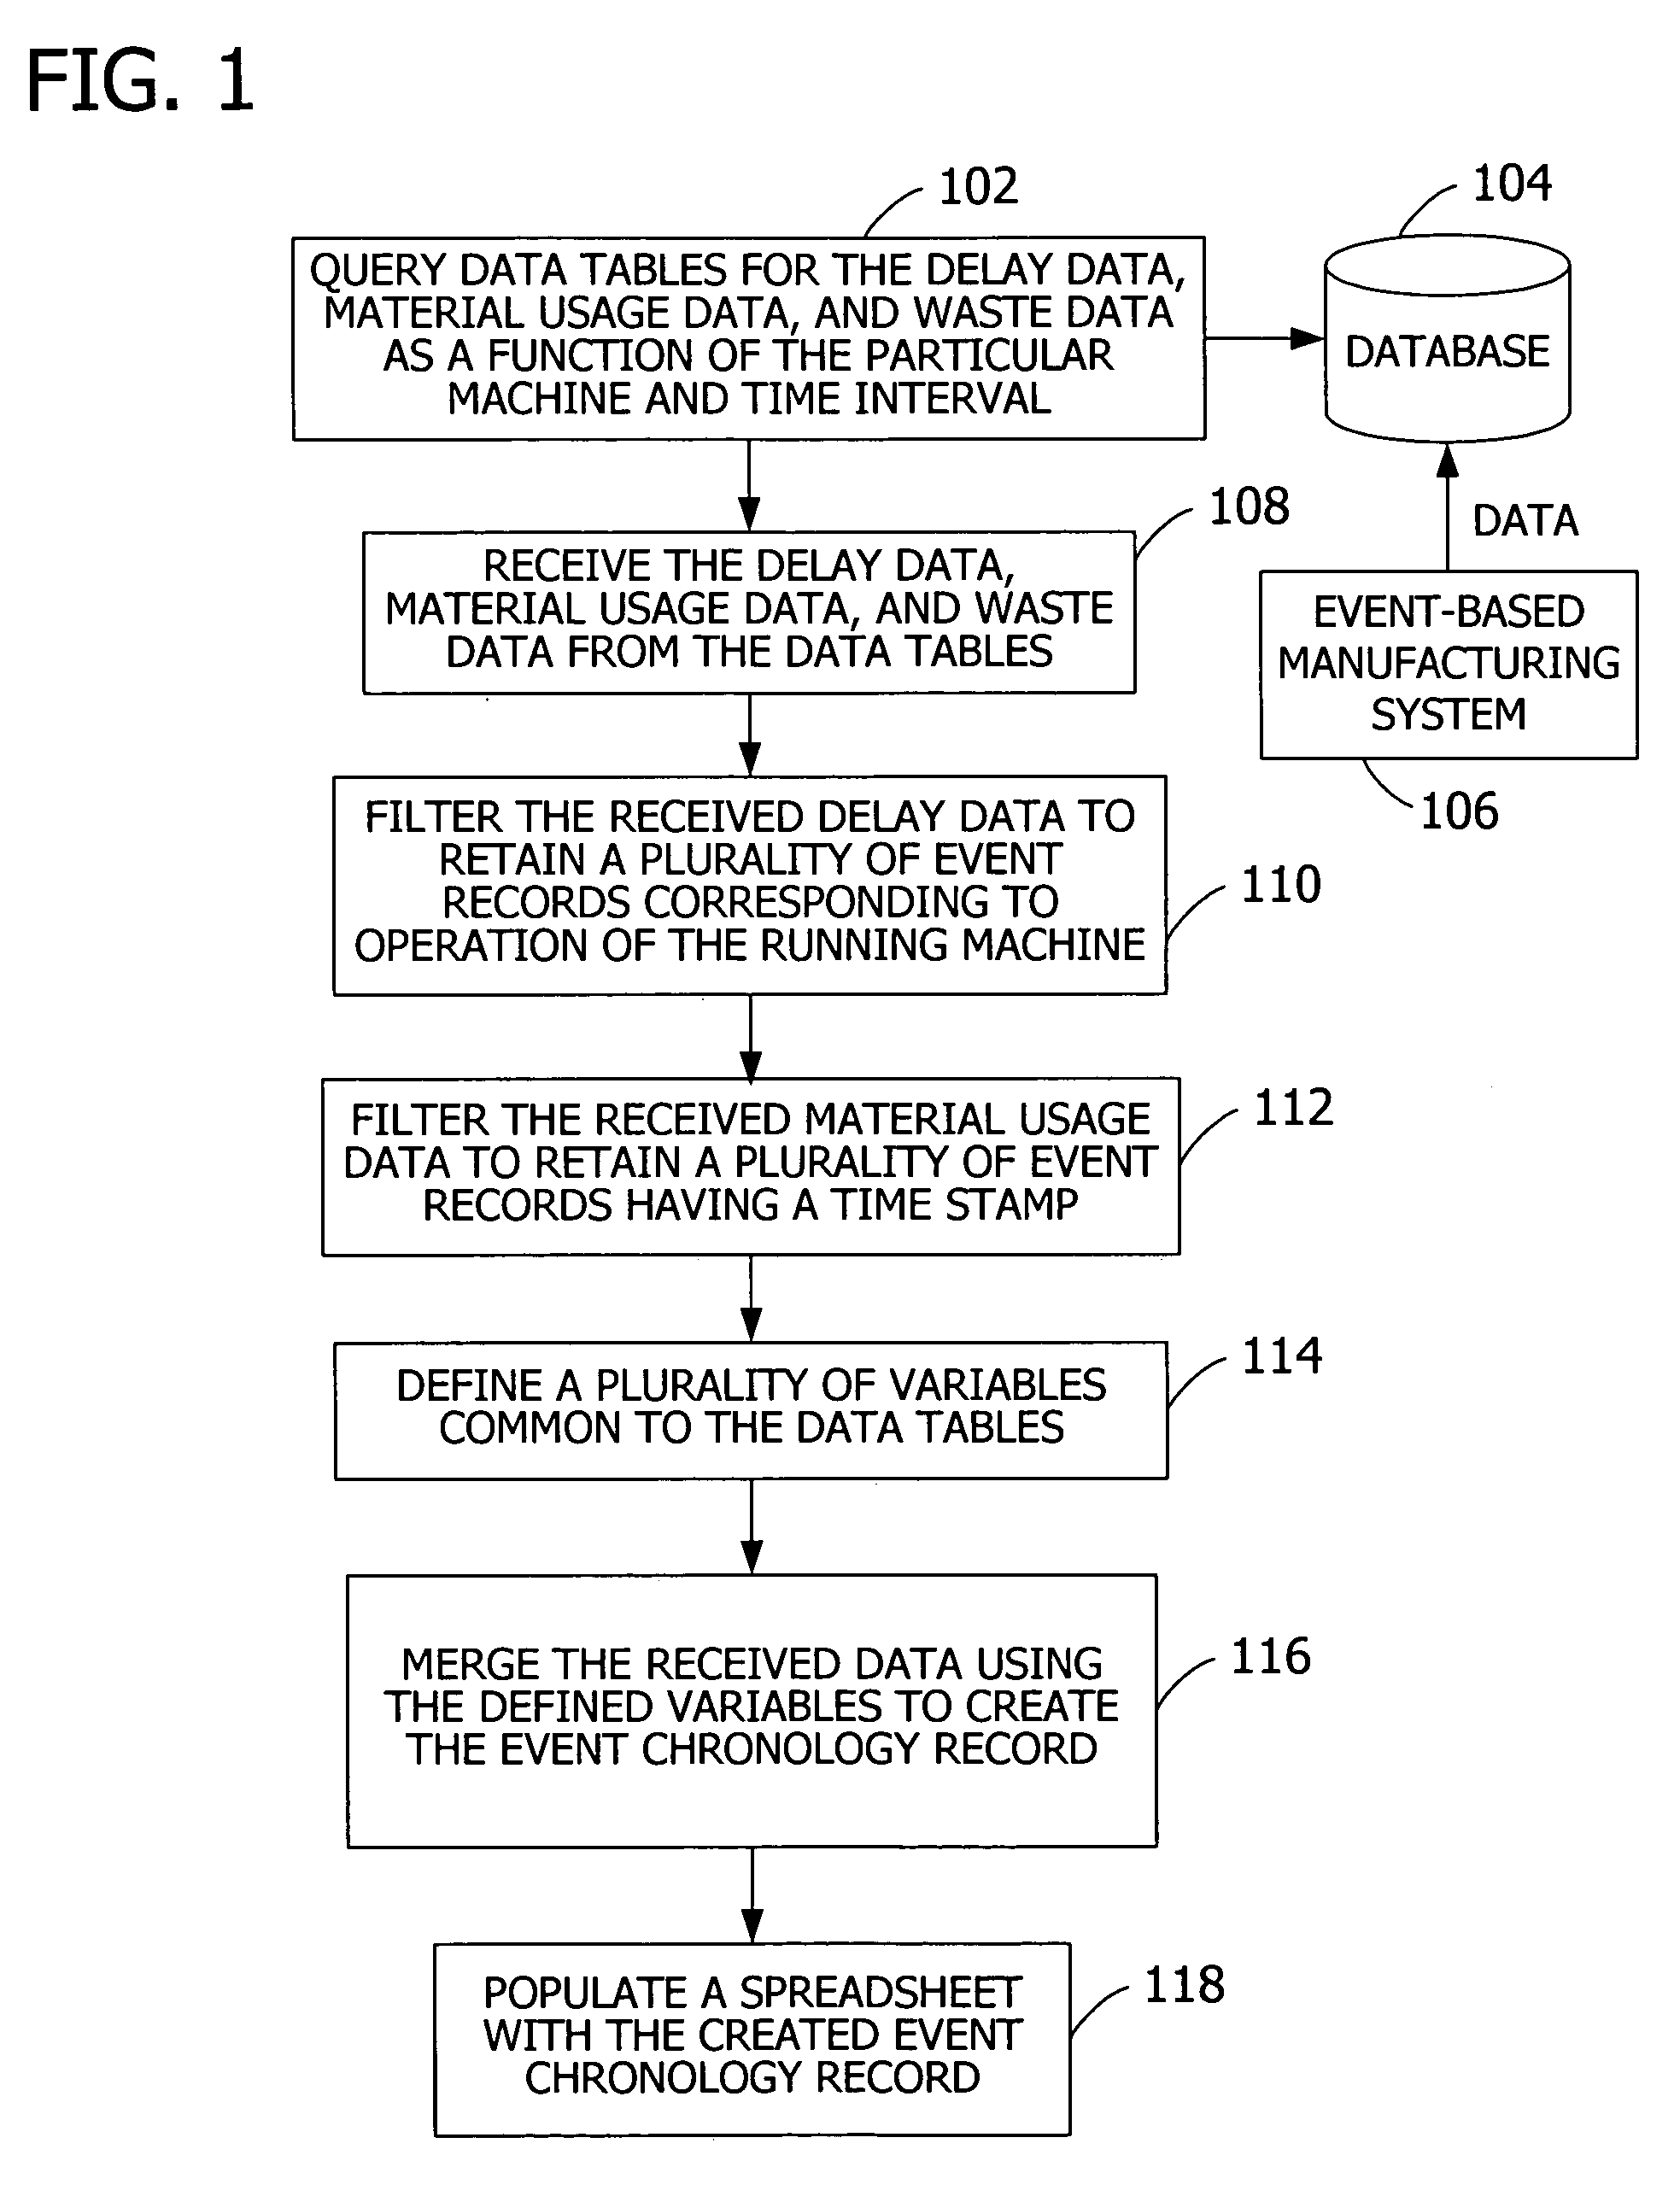 Generating a reliability analysis by identifying causal relationships between events in an event-based manufacturing system